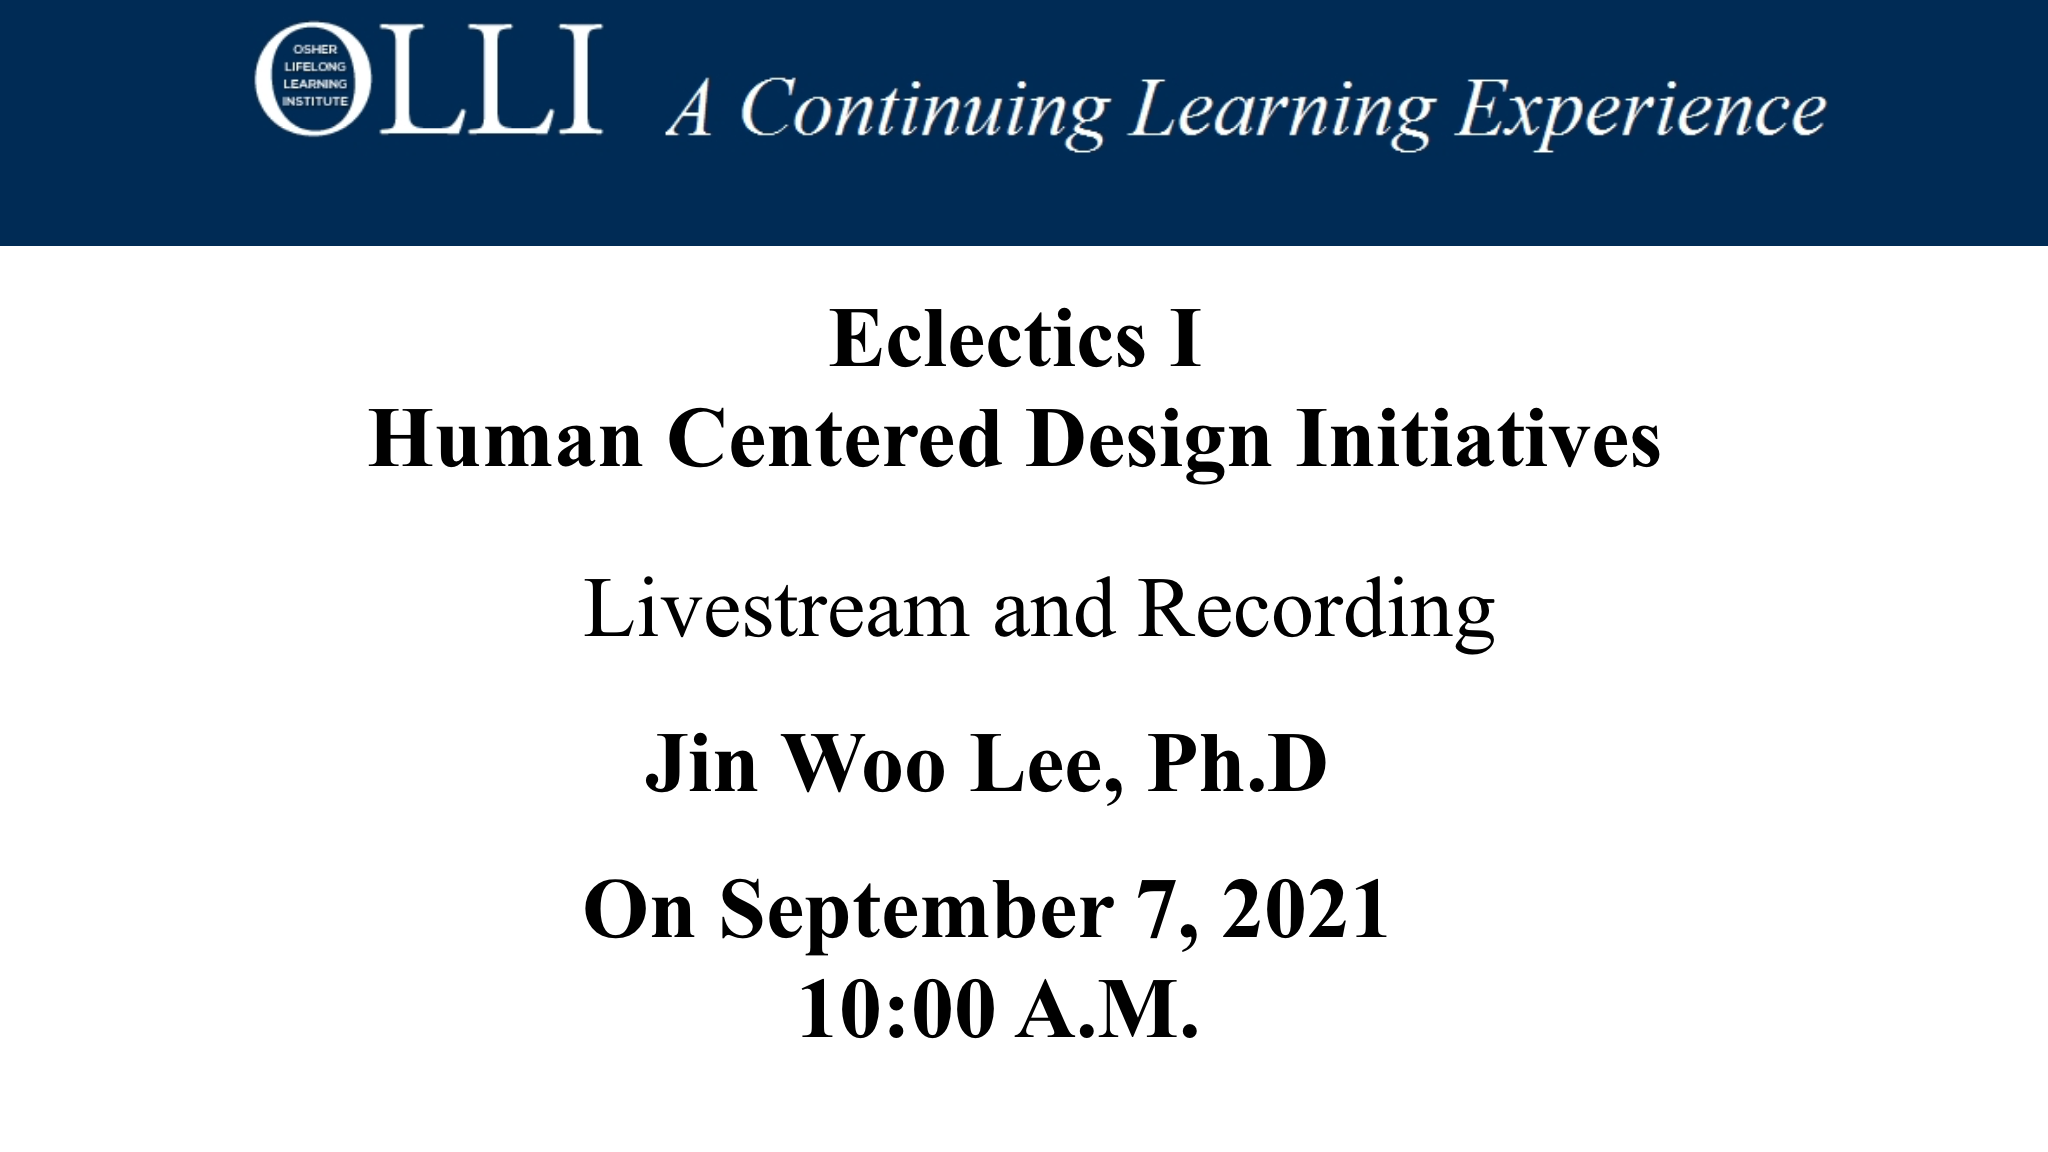 Click here to view the livestream of Eclectics I Human Centered Design